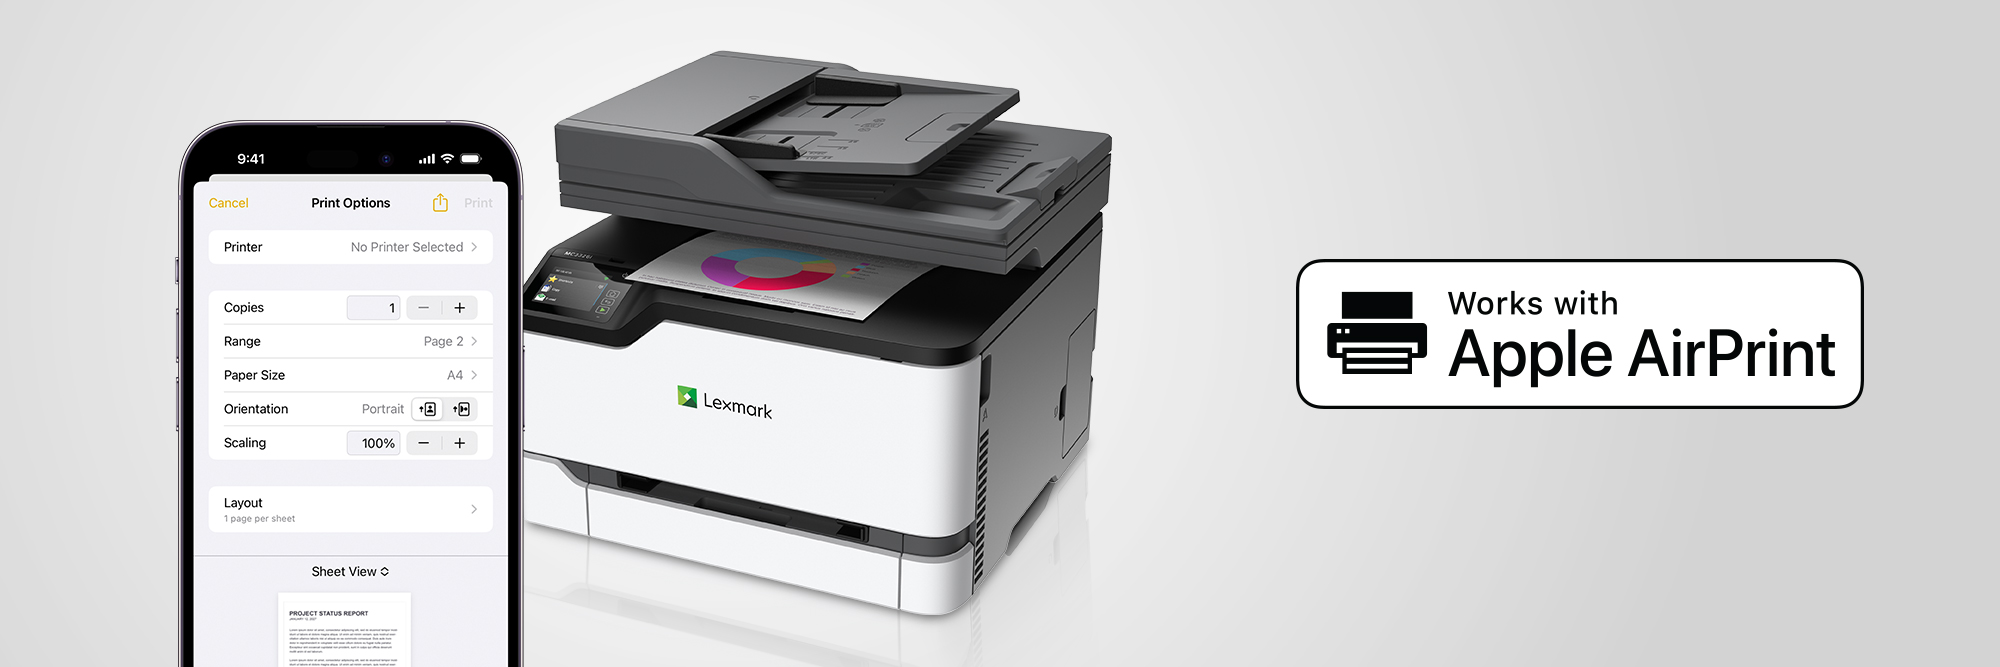 Printers for AirPrint and Apple devices